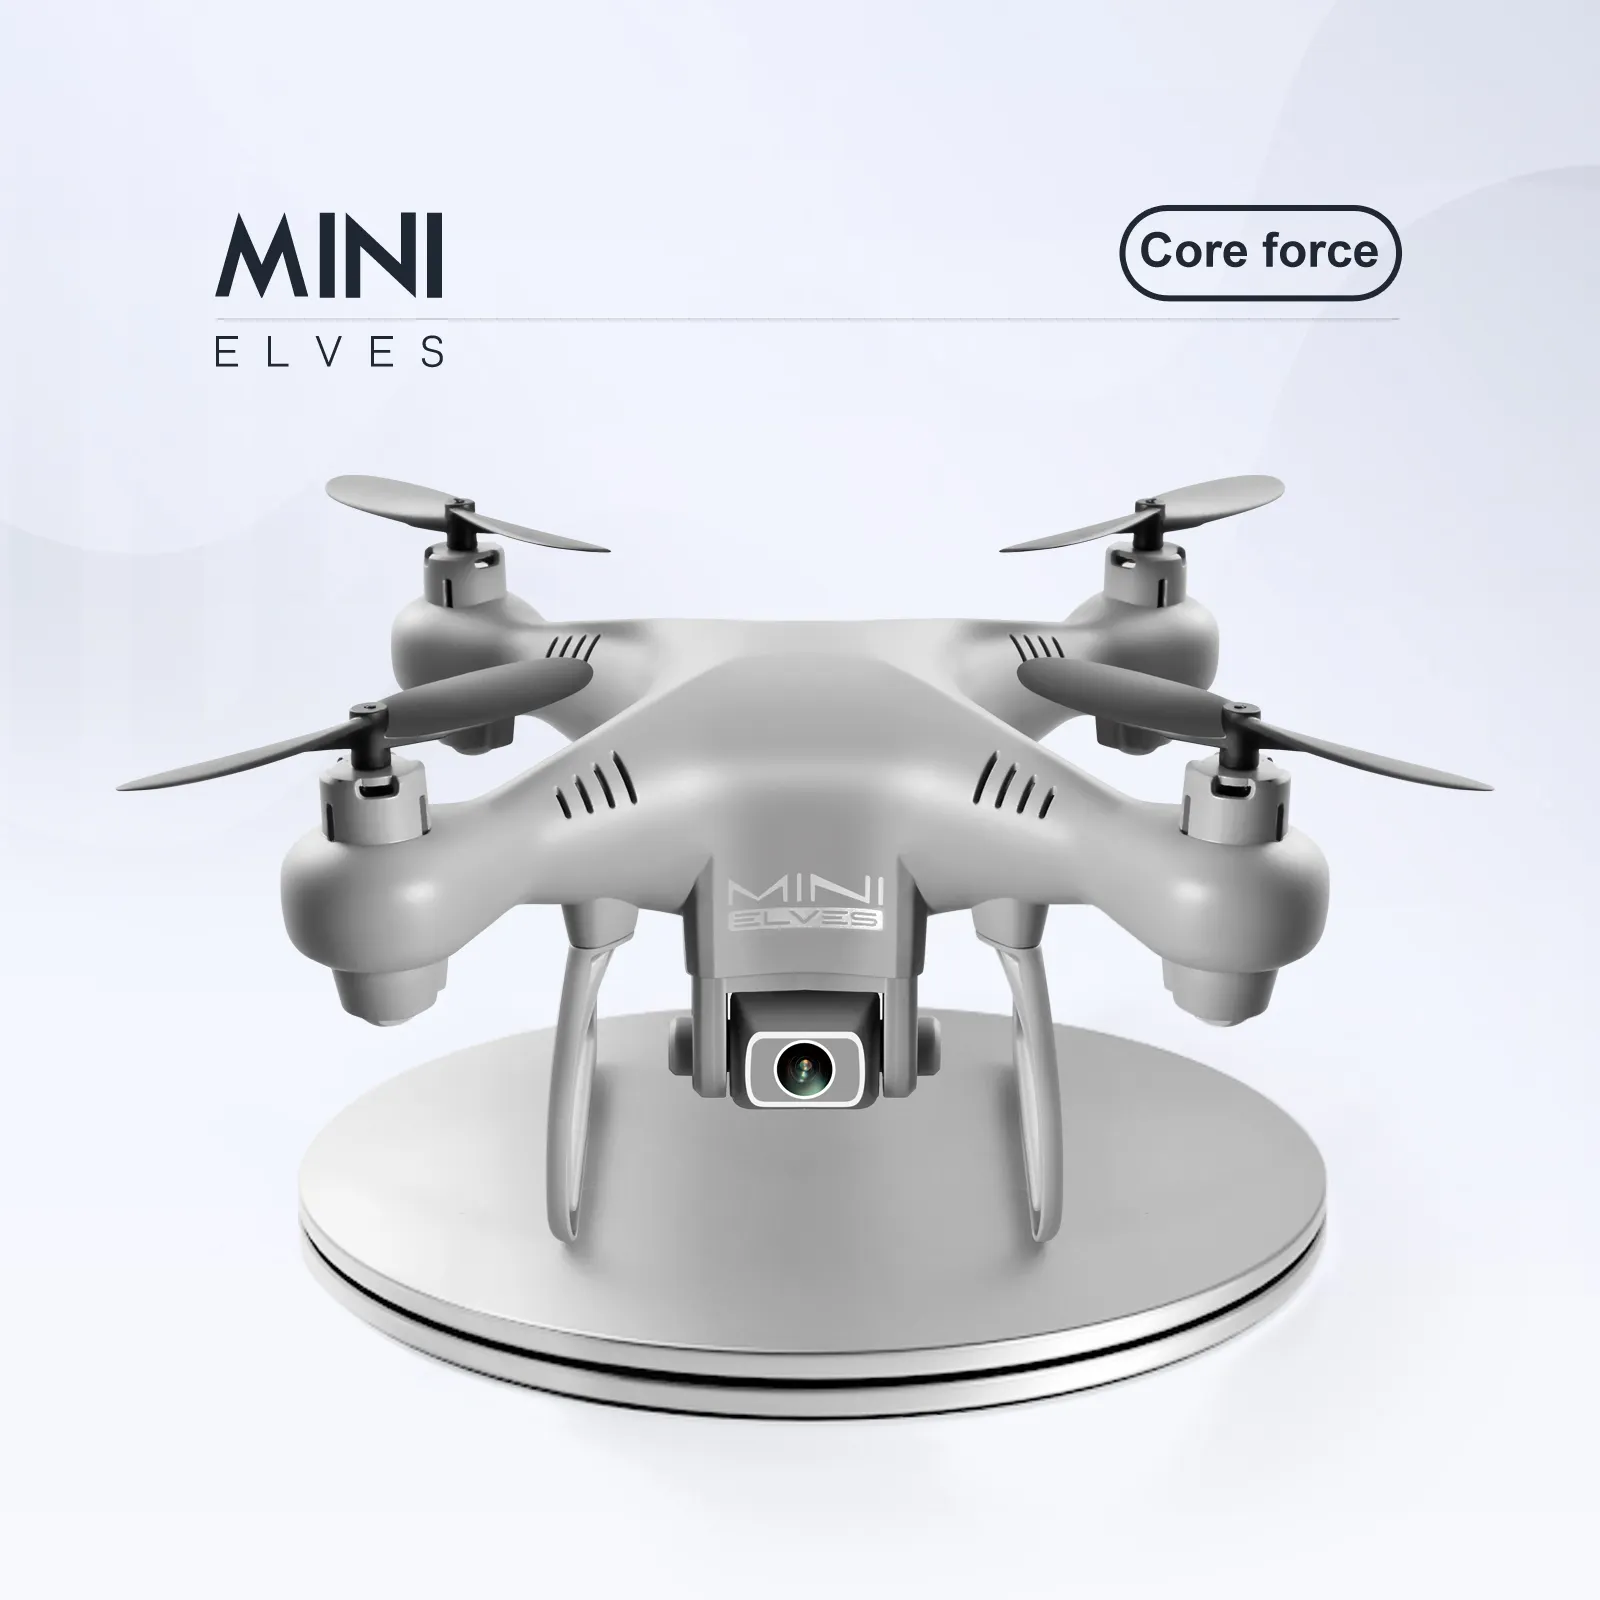 New KY908 Mini Drone With Camera HD 4K Profesional WiFi FPV Altitude Hold Mode Foldable Rc Helicopter Kids Toys Gift Dron